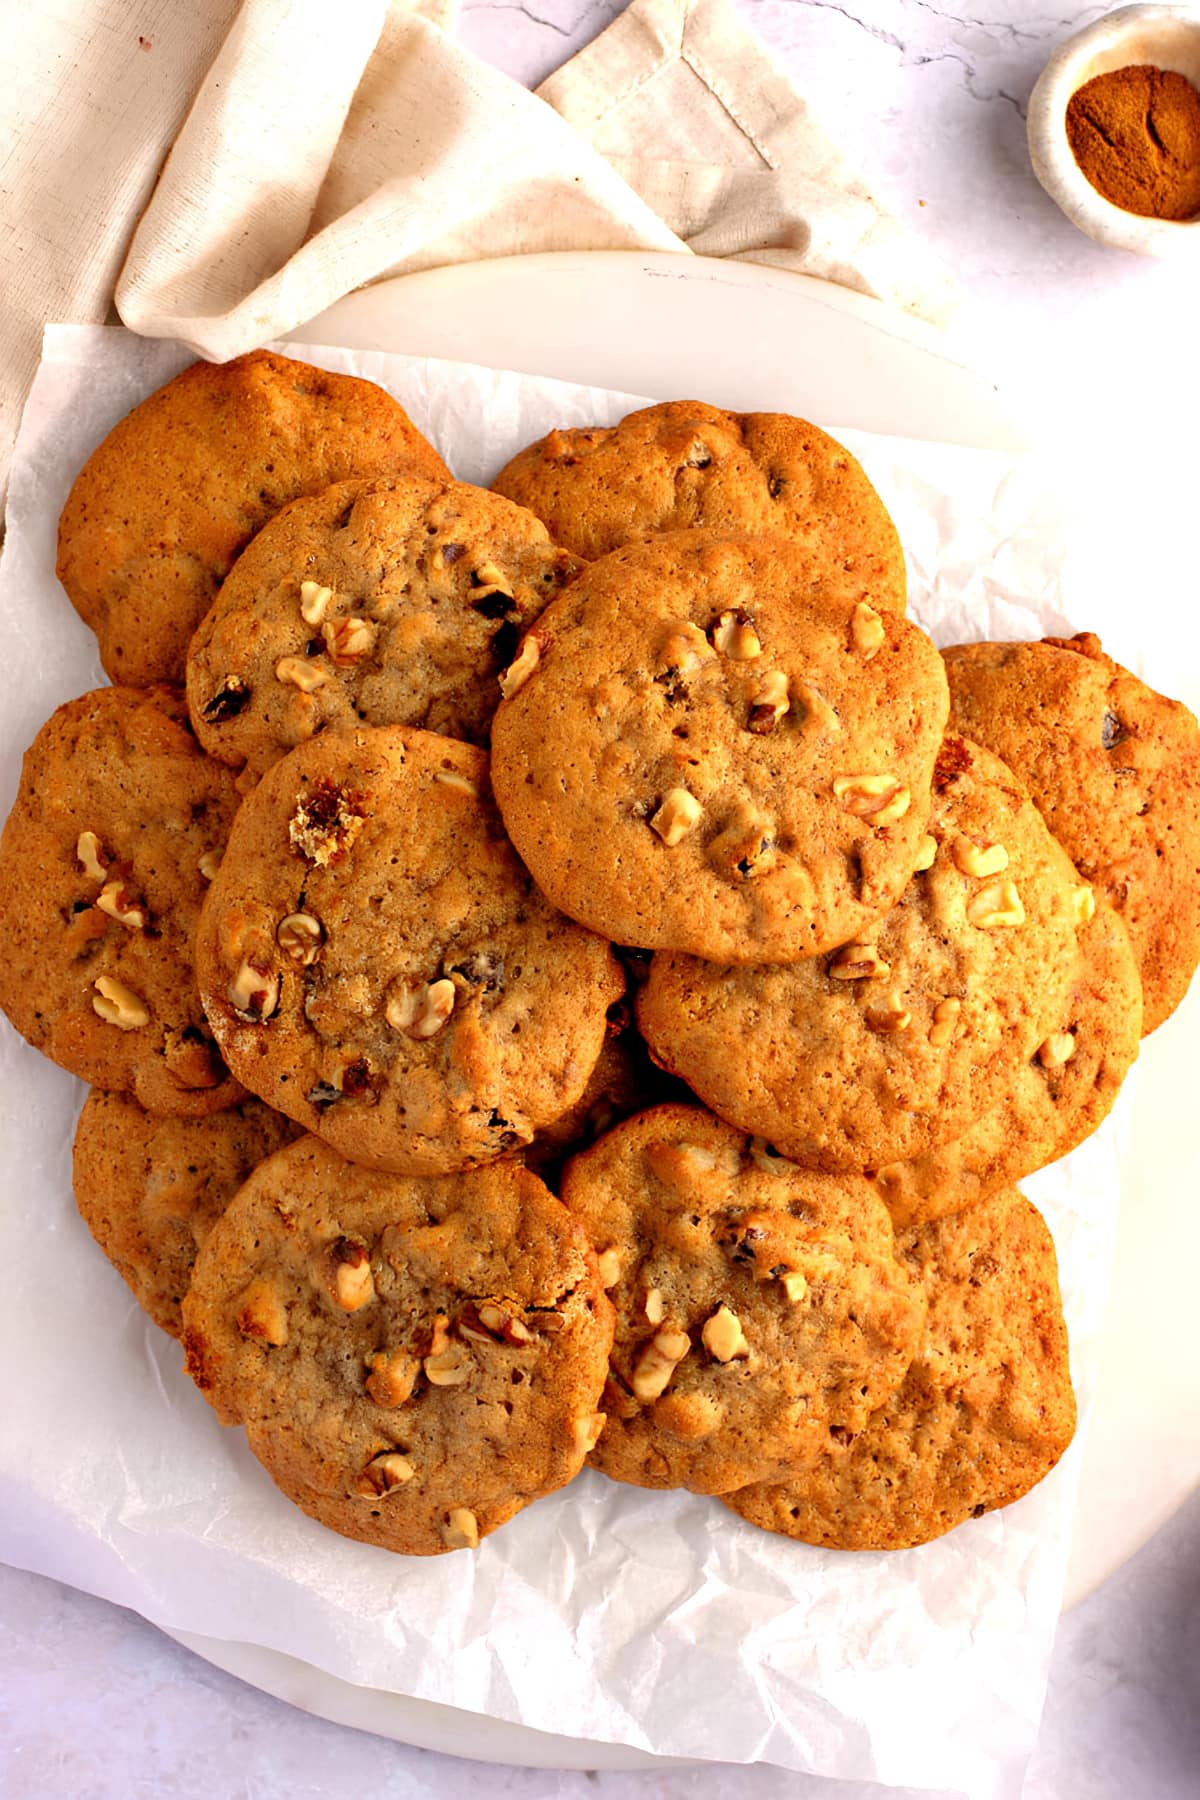 Pile of nutty and fruity persimmon cookies with walnuts and raisins on parchment paper on a plate with a bowl of cinnamon in the background